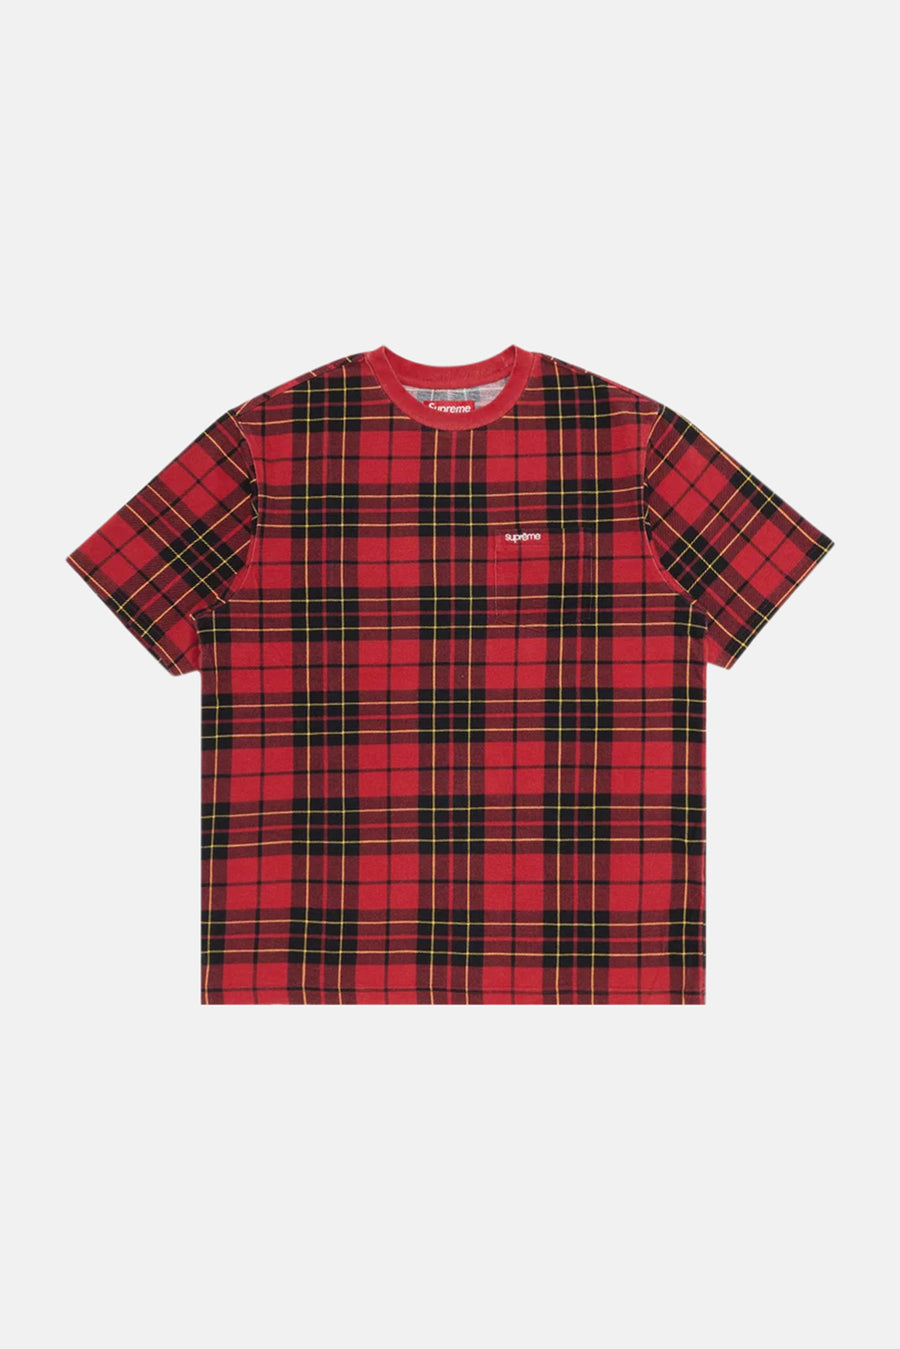 S/S Pocket Tee Red Plaid